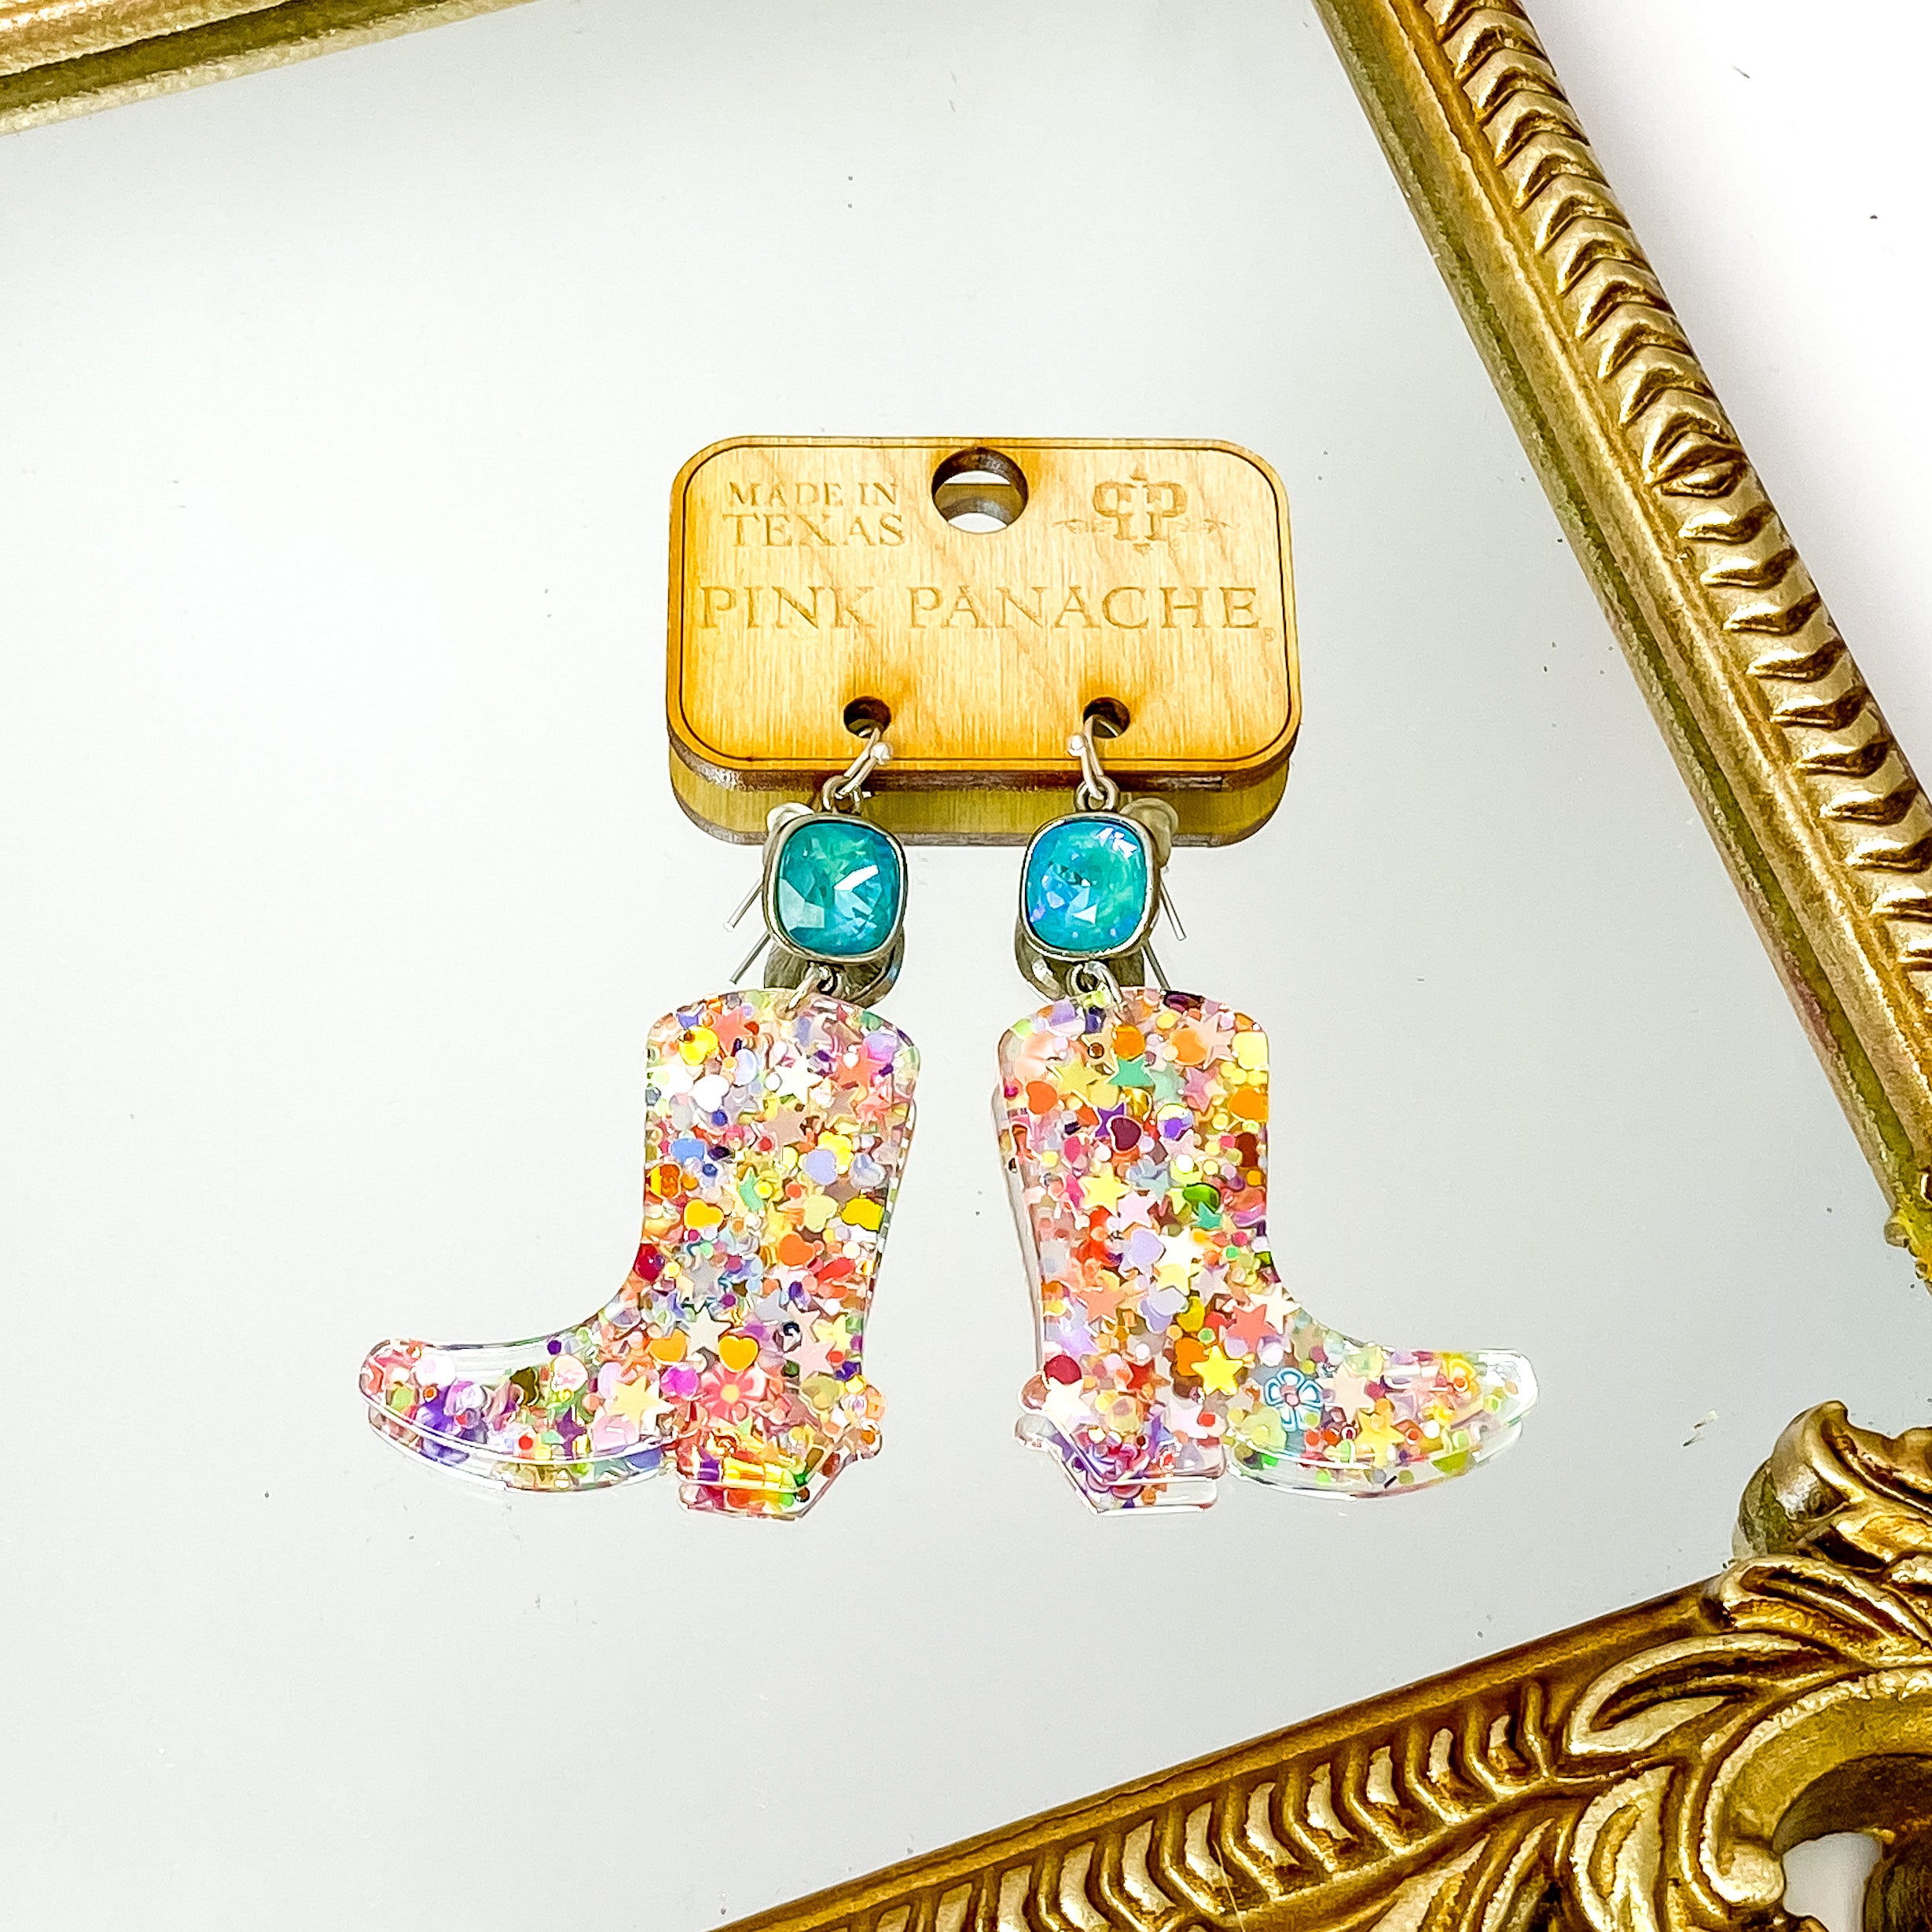 Silver, cushion cut laguna delight crystal drop earrings with a hanging boot pendant. This pendant has multicolor glitter all over. These earrings are pictured on a wood earrings holder on a gold mirror on a white background. 